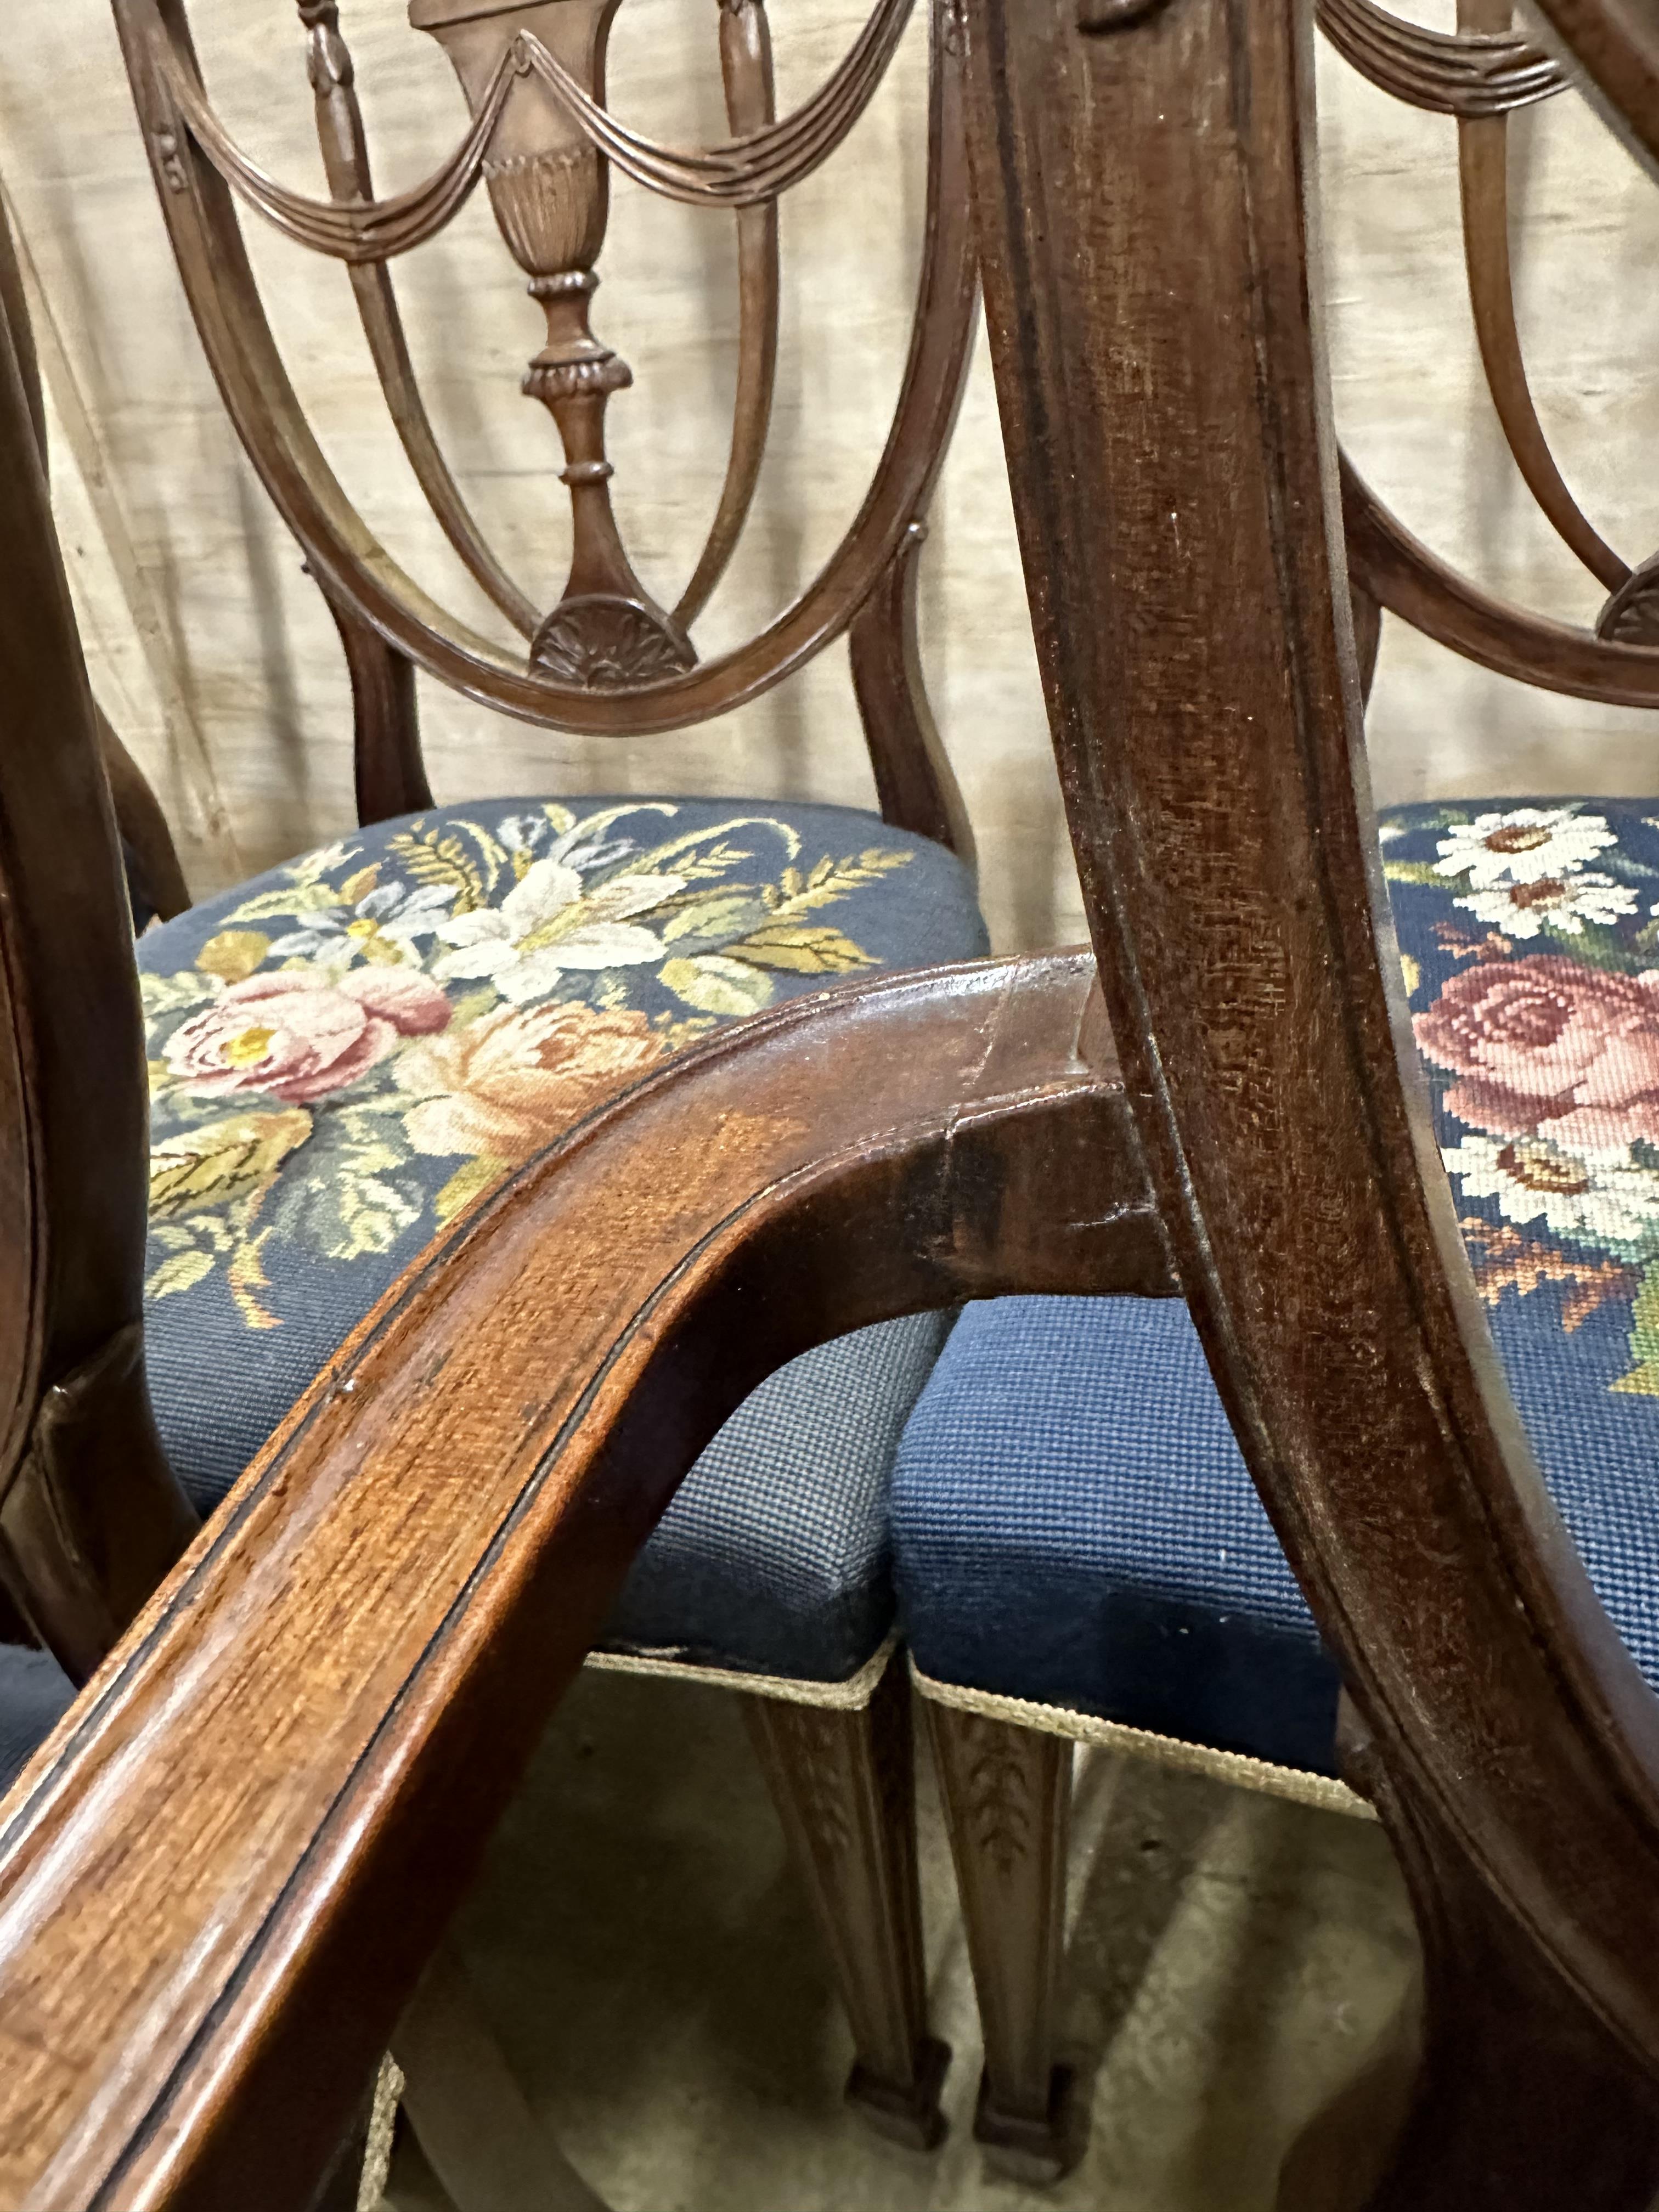 A set of eight Edwardian Hepplewhite style mahogany dining chairs with tapestry seats, two with arms